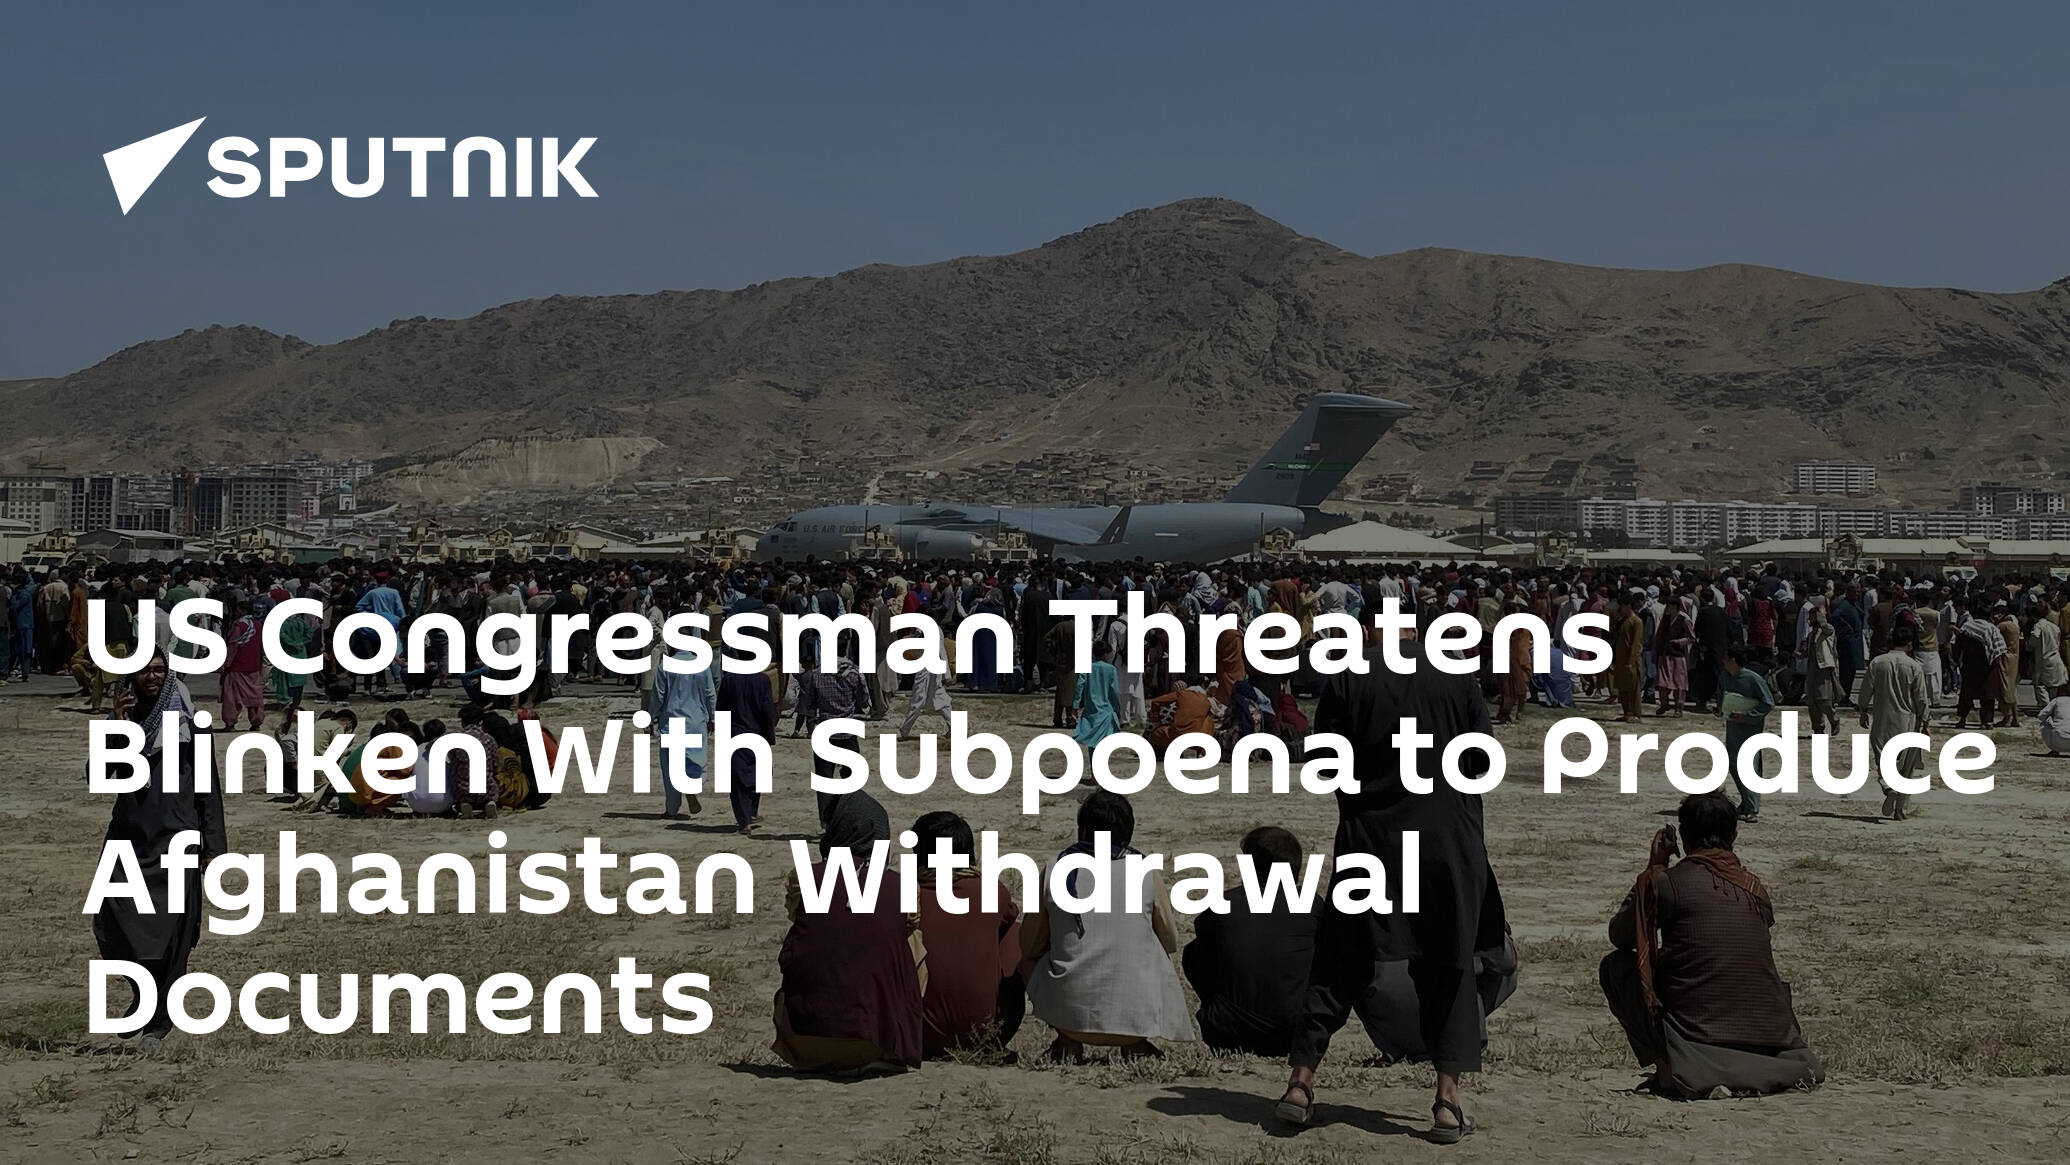 US Congressman Threatens Blinken With Subpoena to Produce Afghanistan Withdrawal Documents